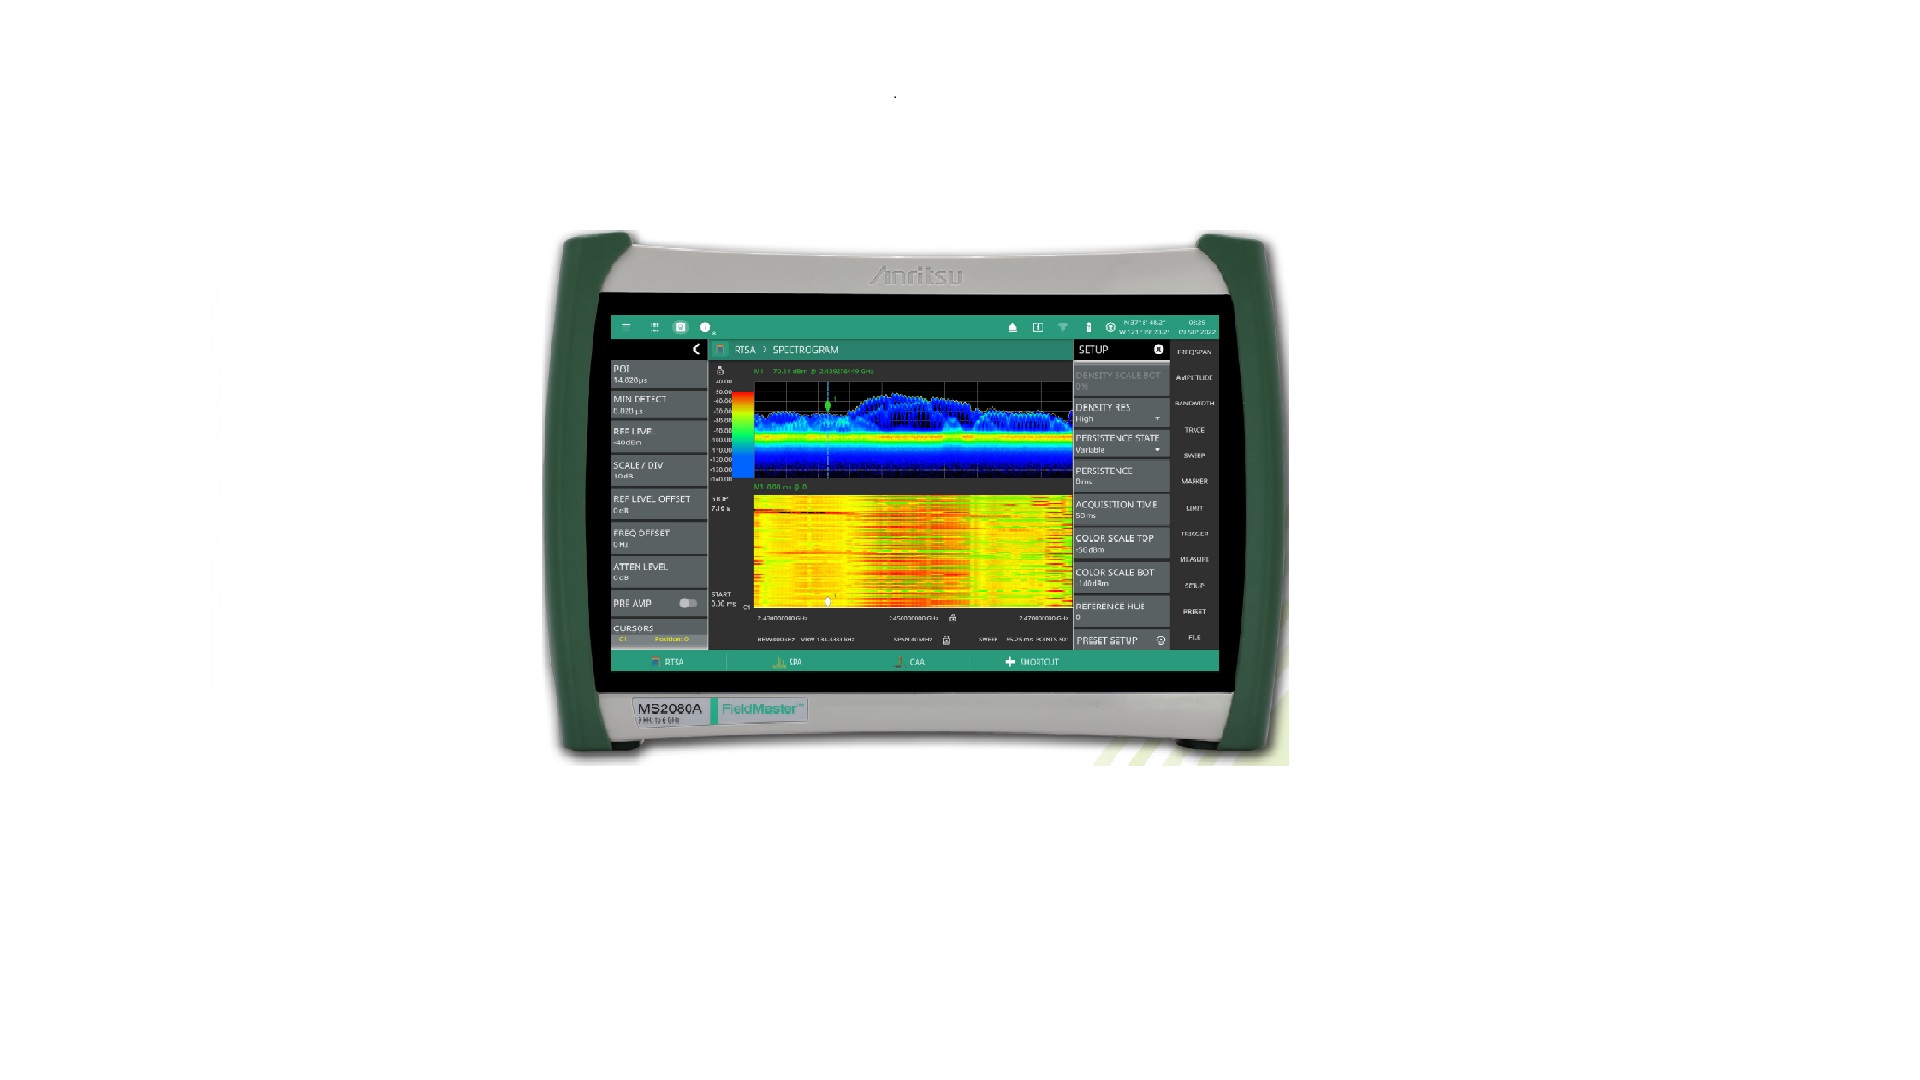 Anritsu Field Master MS2080A now Supports 5G FR1